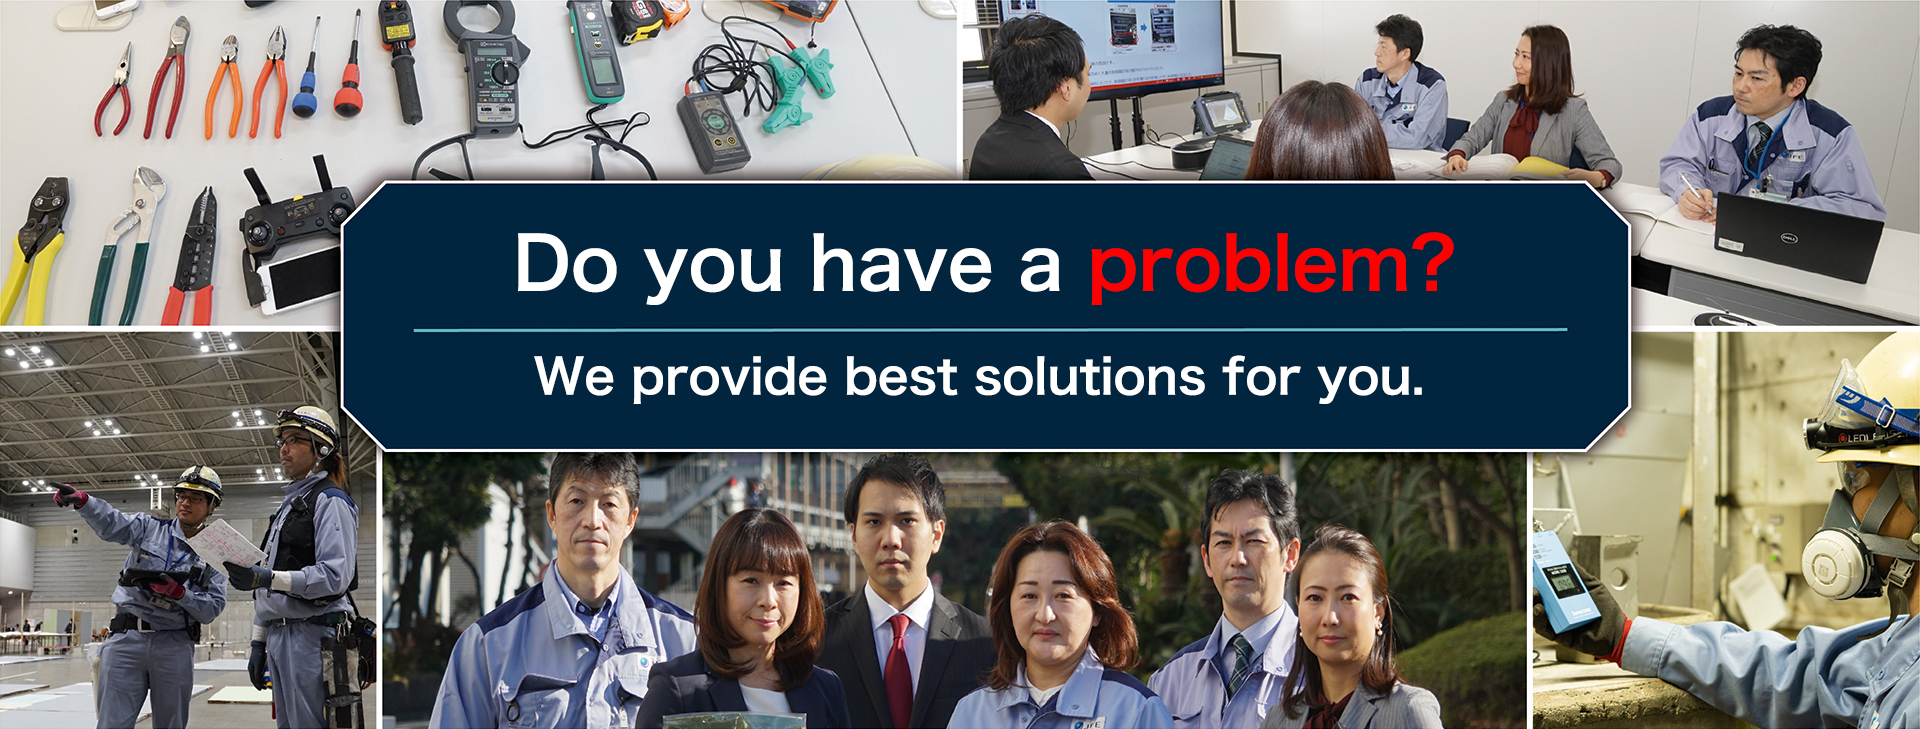 Do you have a problem?～ We provide best solutions for you ～